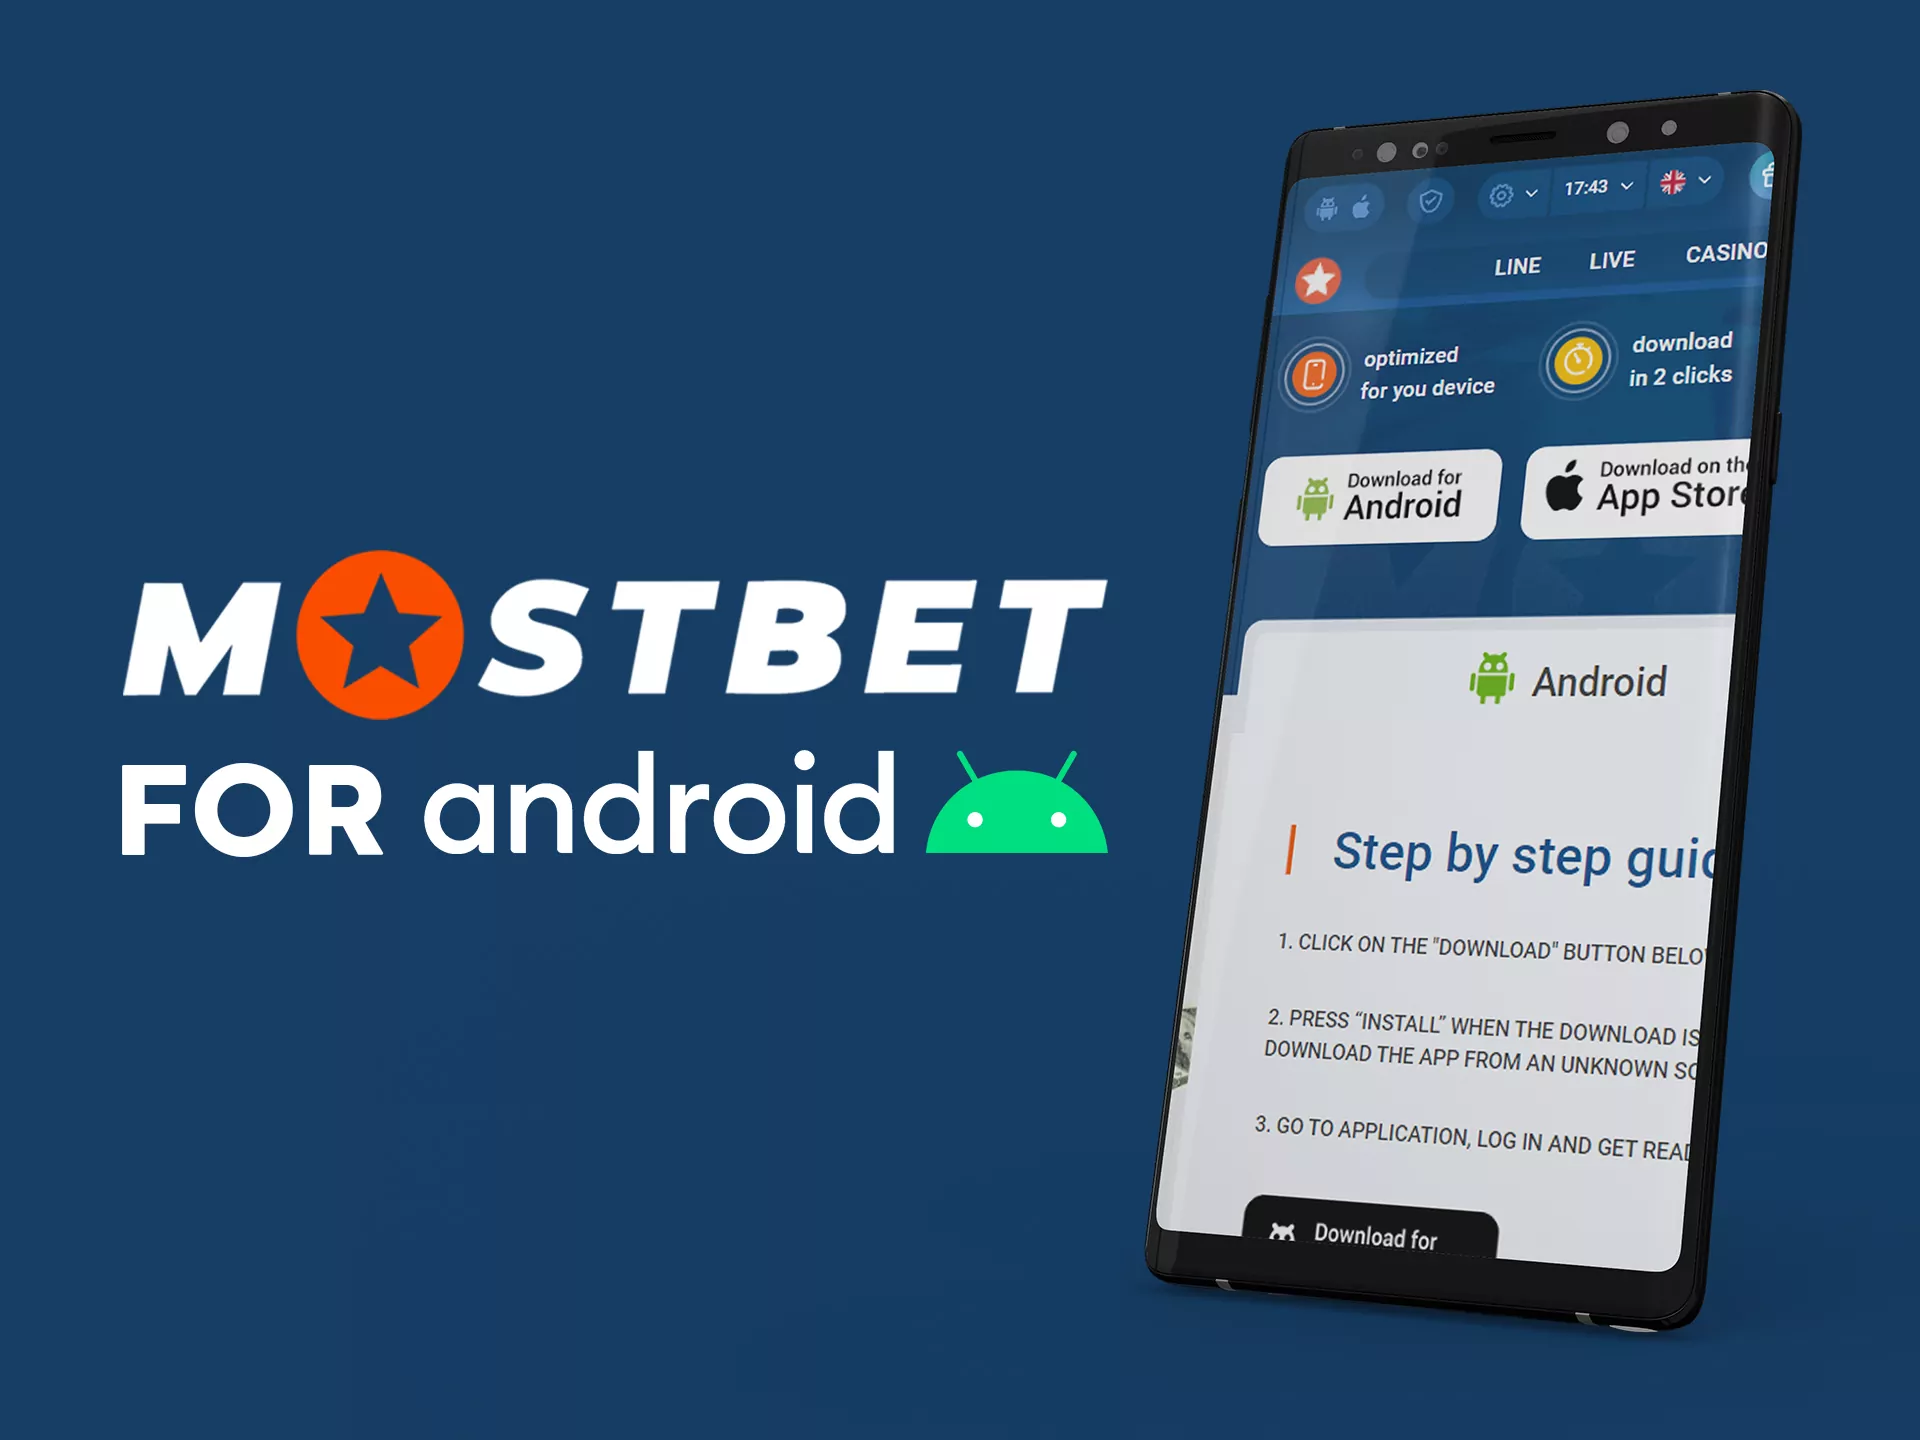 Use all of the Mostbet features with your Android device.